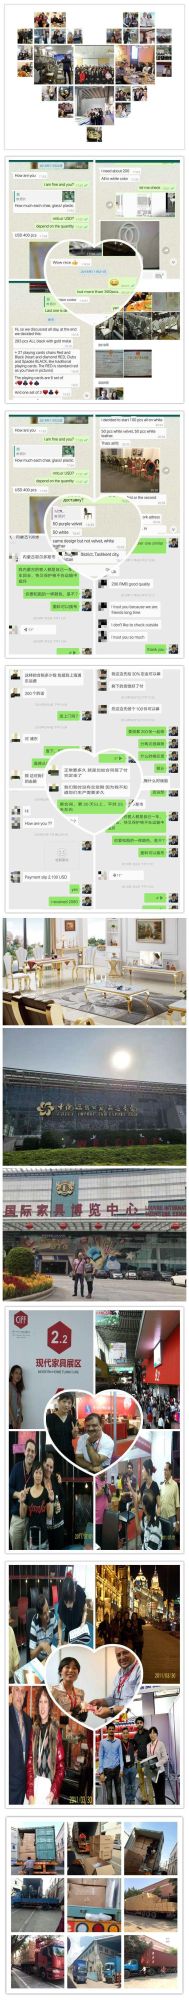 Factory Direct Modern Dining Table Chinese Dining Furniture Metal Table and Chair for Living Room